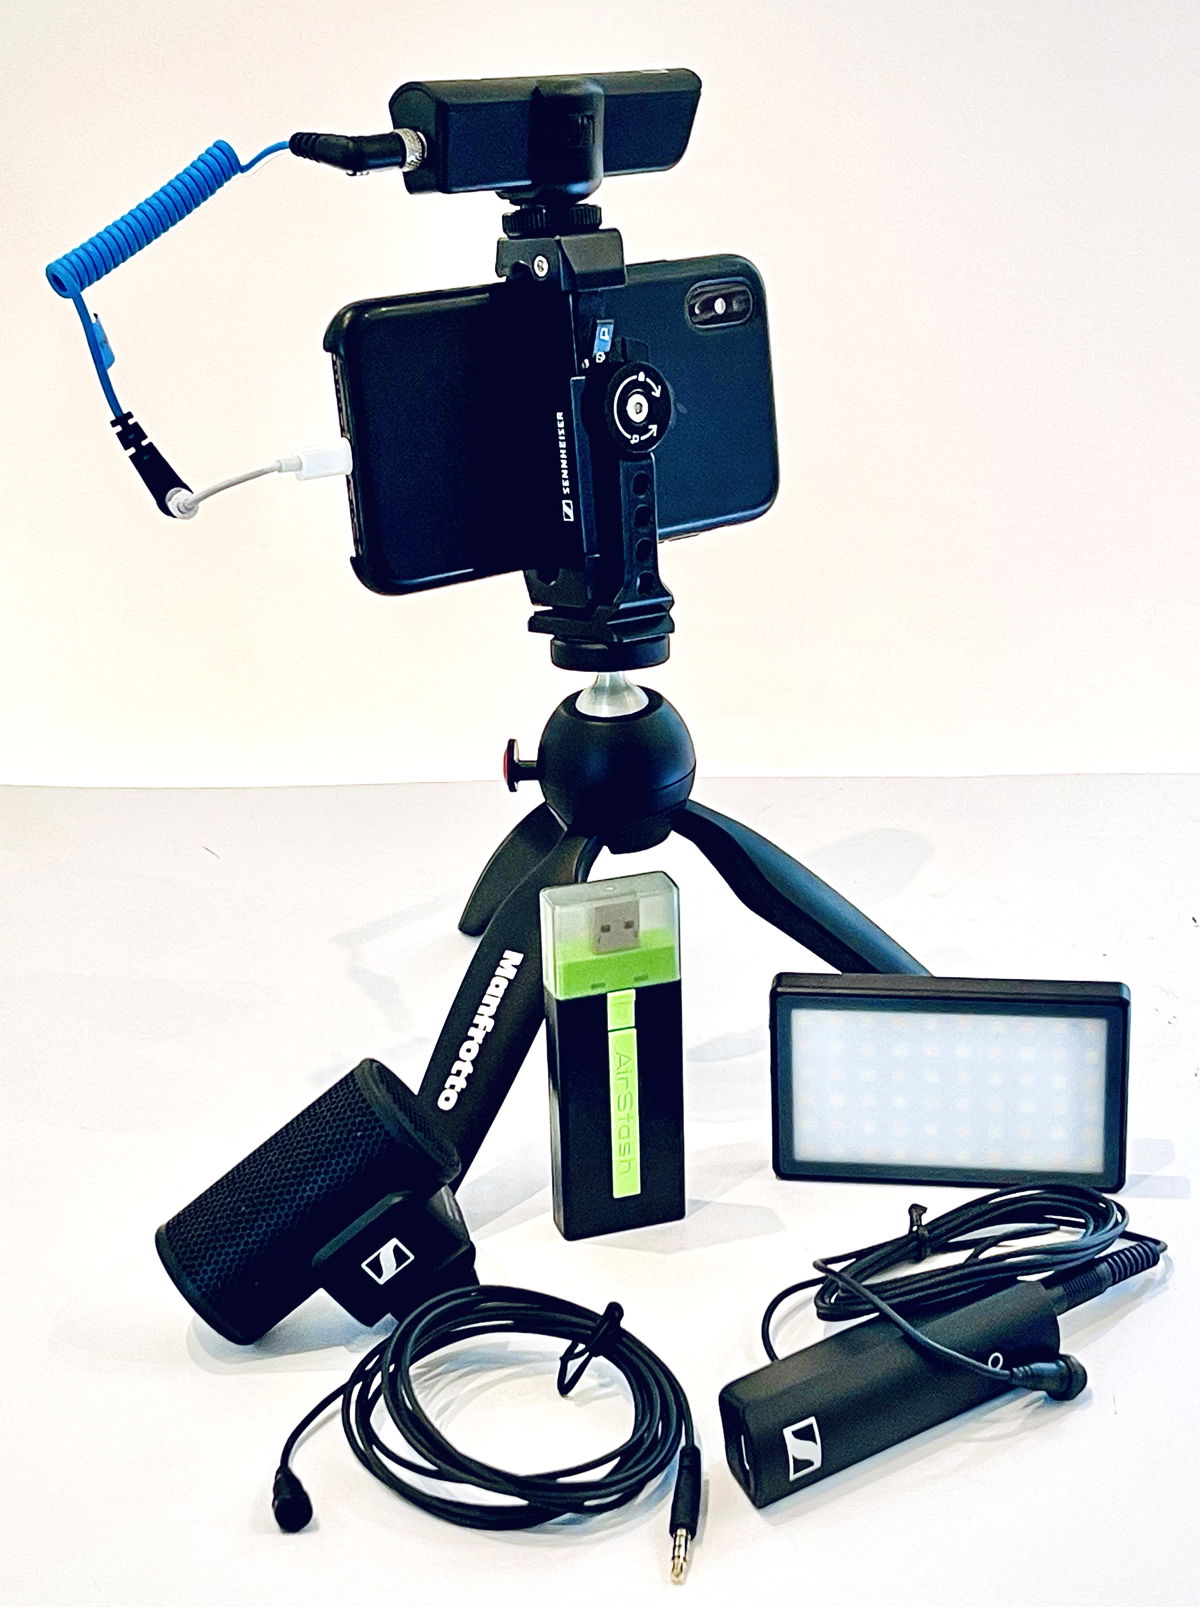 Figure 11.   Intermediate Kit  with iPhone XS, XS Wireless Digital Portable Lav Mobile Kit (includes Manfrotto PIXI and Smartphone Clamp), MKE 200 vlogging microphone, XS Lav Mobile clip-on mic, Airstash, Lume Cube Panel Mini, and TRRS to Lightning adaptor  (Photo credit: Ivo Burum)